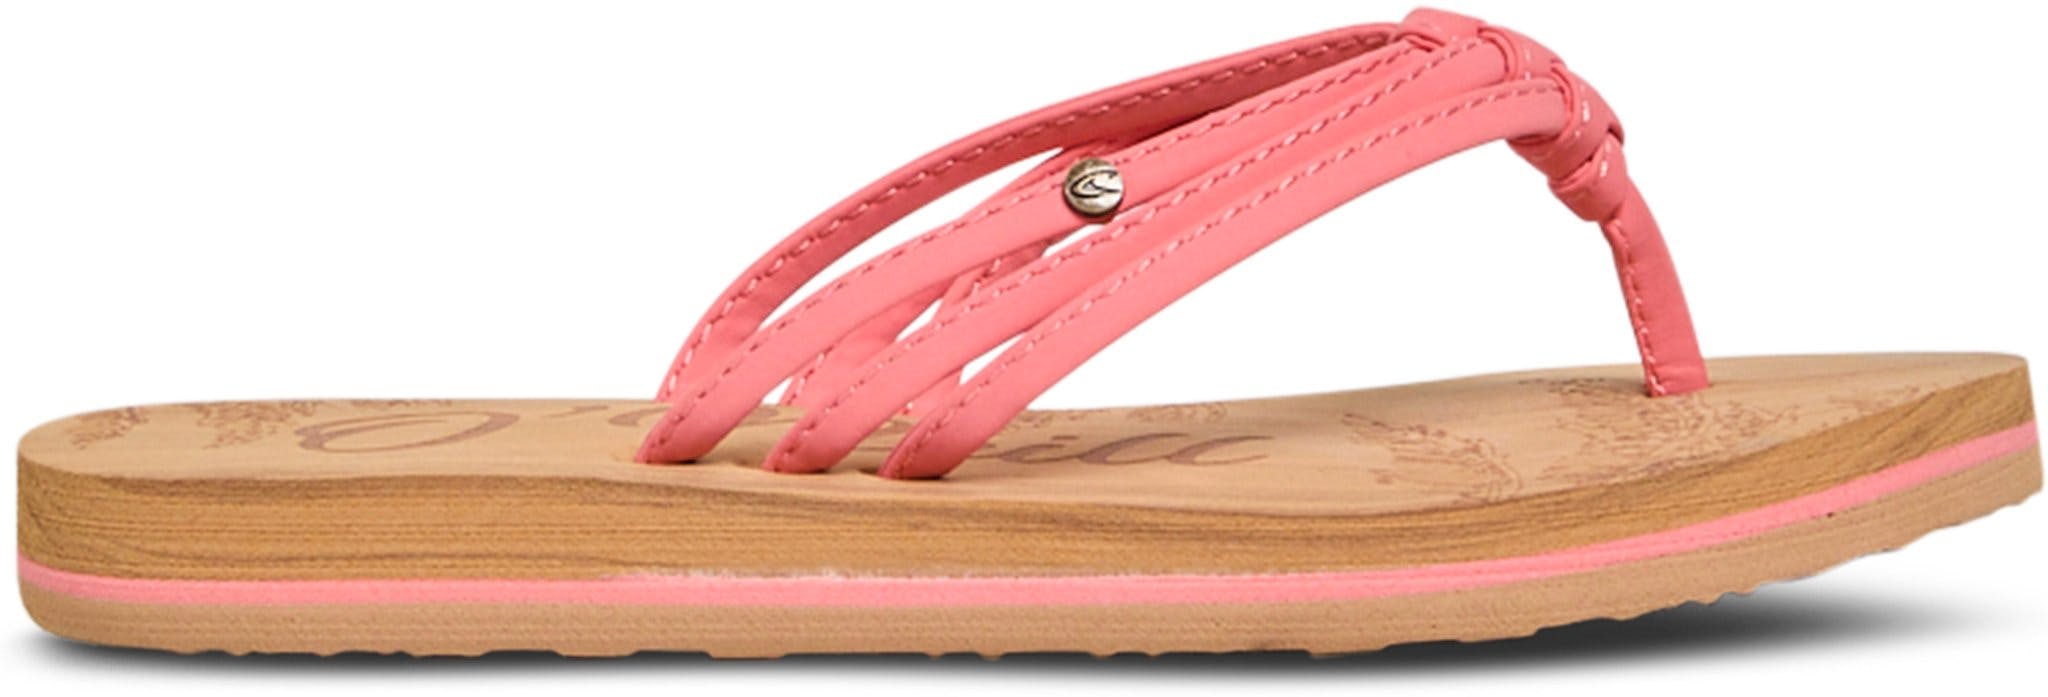 Product image for Ditsy Sandals - Girls